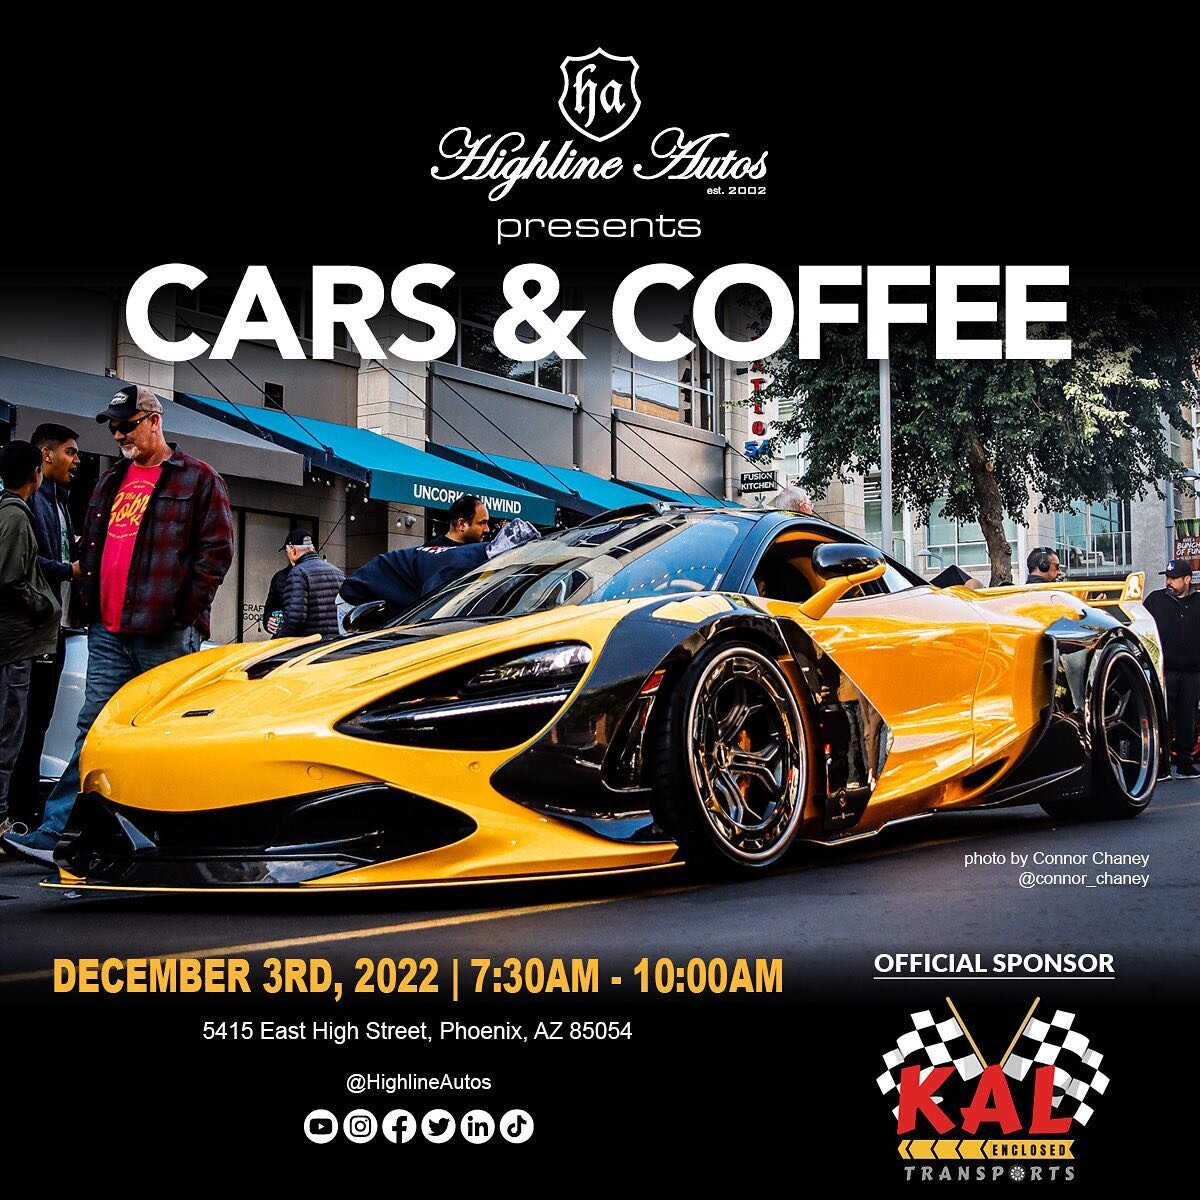 It&rsquo;s that time again! Another first Saturday w/ @highlineautos #CarsAndCoffee. Looking forward to seeing everyone, Stop by and let&rsquo;s talk about your next transport 😁 
&bull;
&bull; 
&bull; Need A Ride? #CallKal 📲😎3307016803
&bull;
&bul